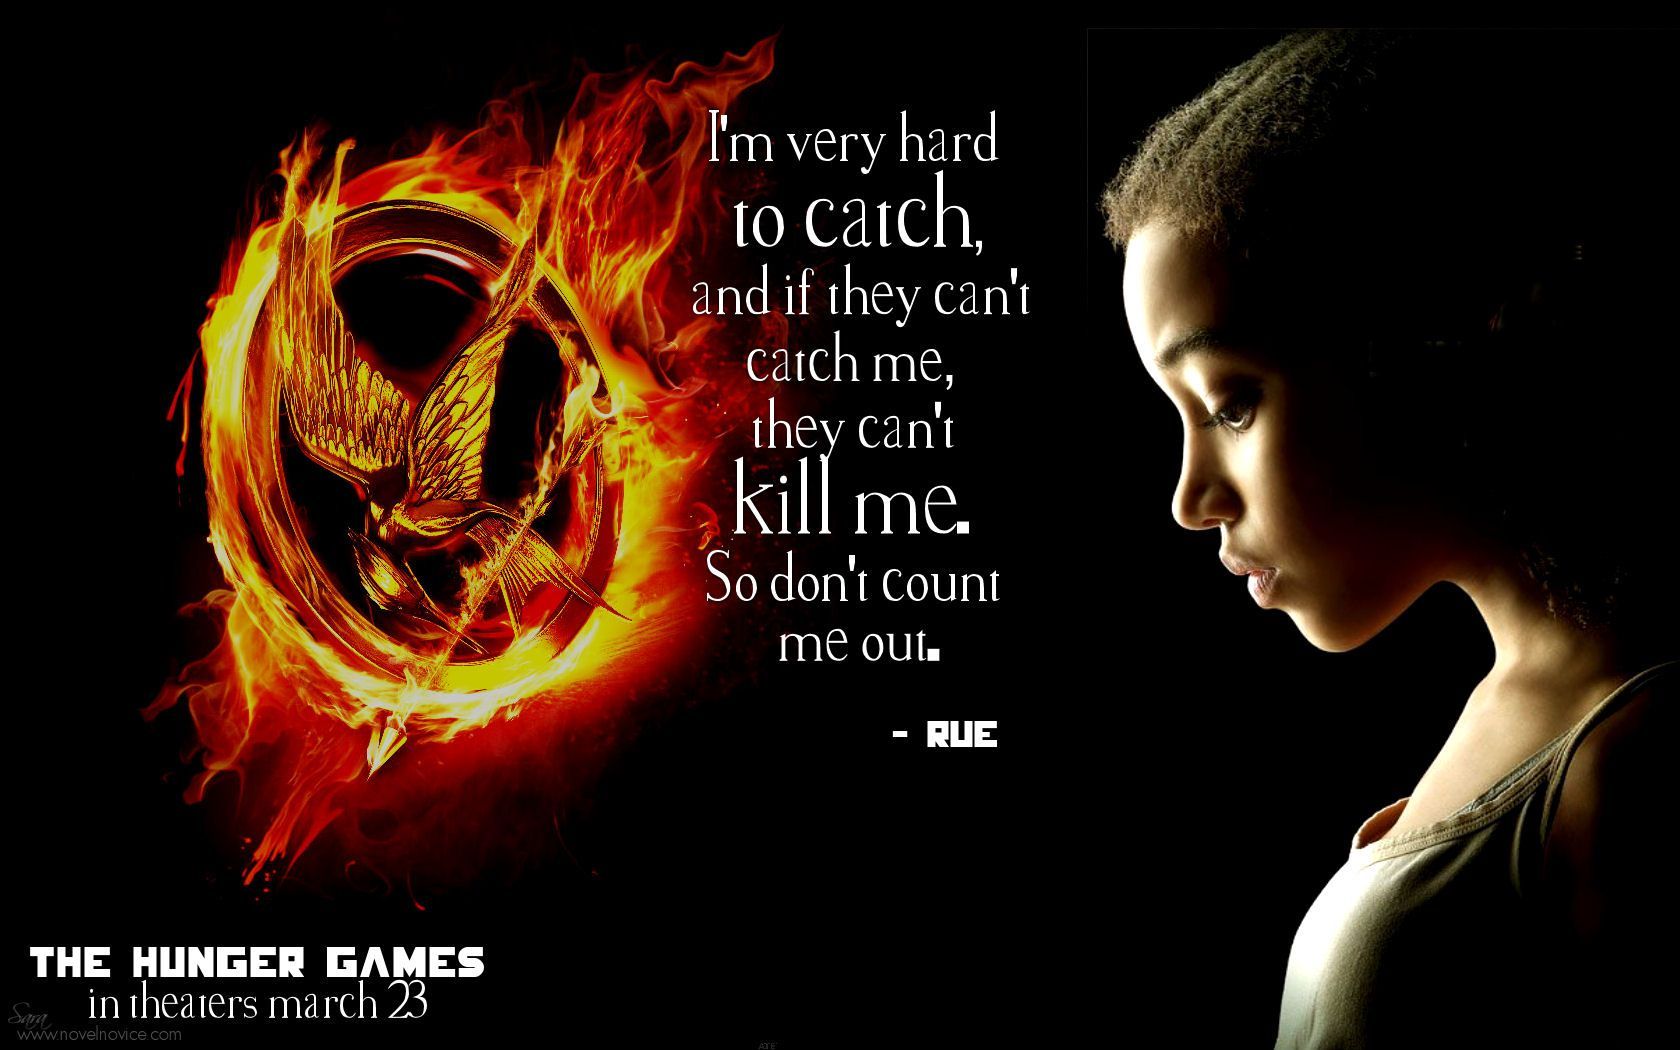 The Hunger Games Movie: Character Desktop Wallpaper. Hunger games quotes, Rue hunger games, Hunger games